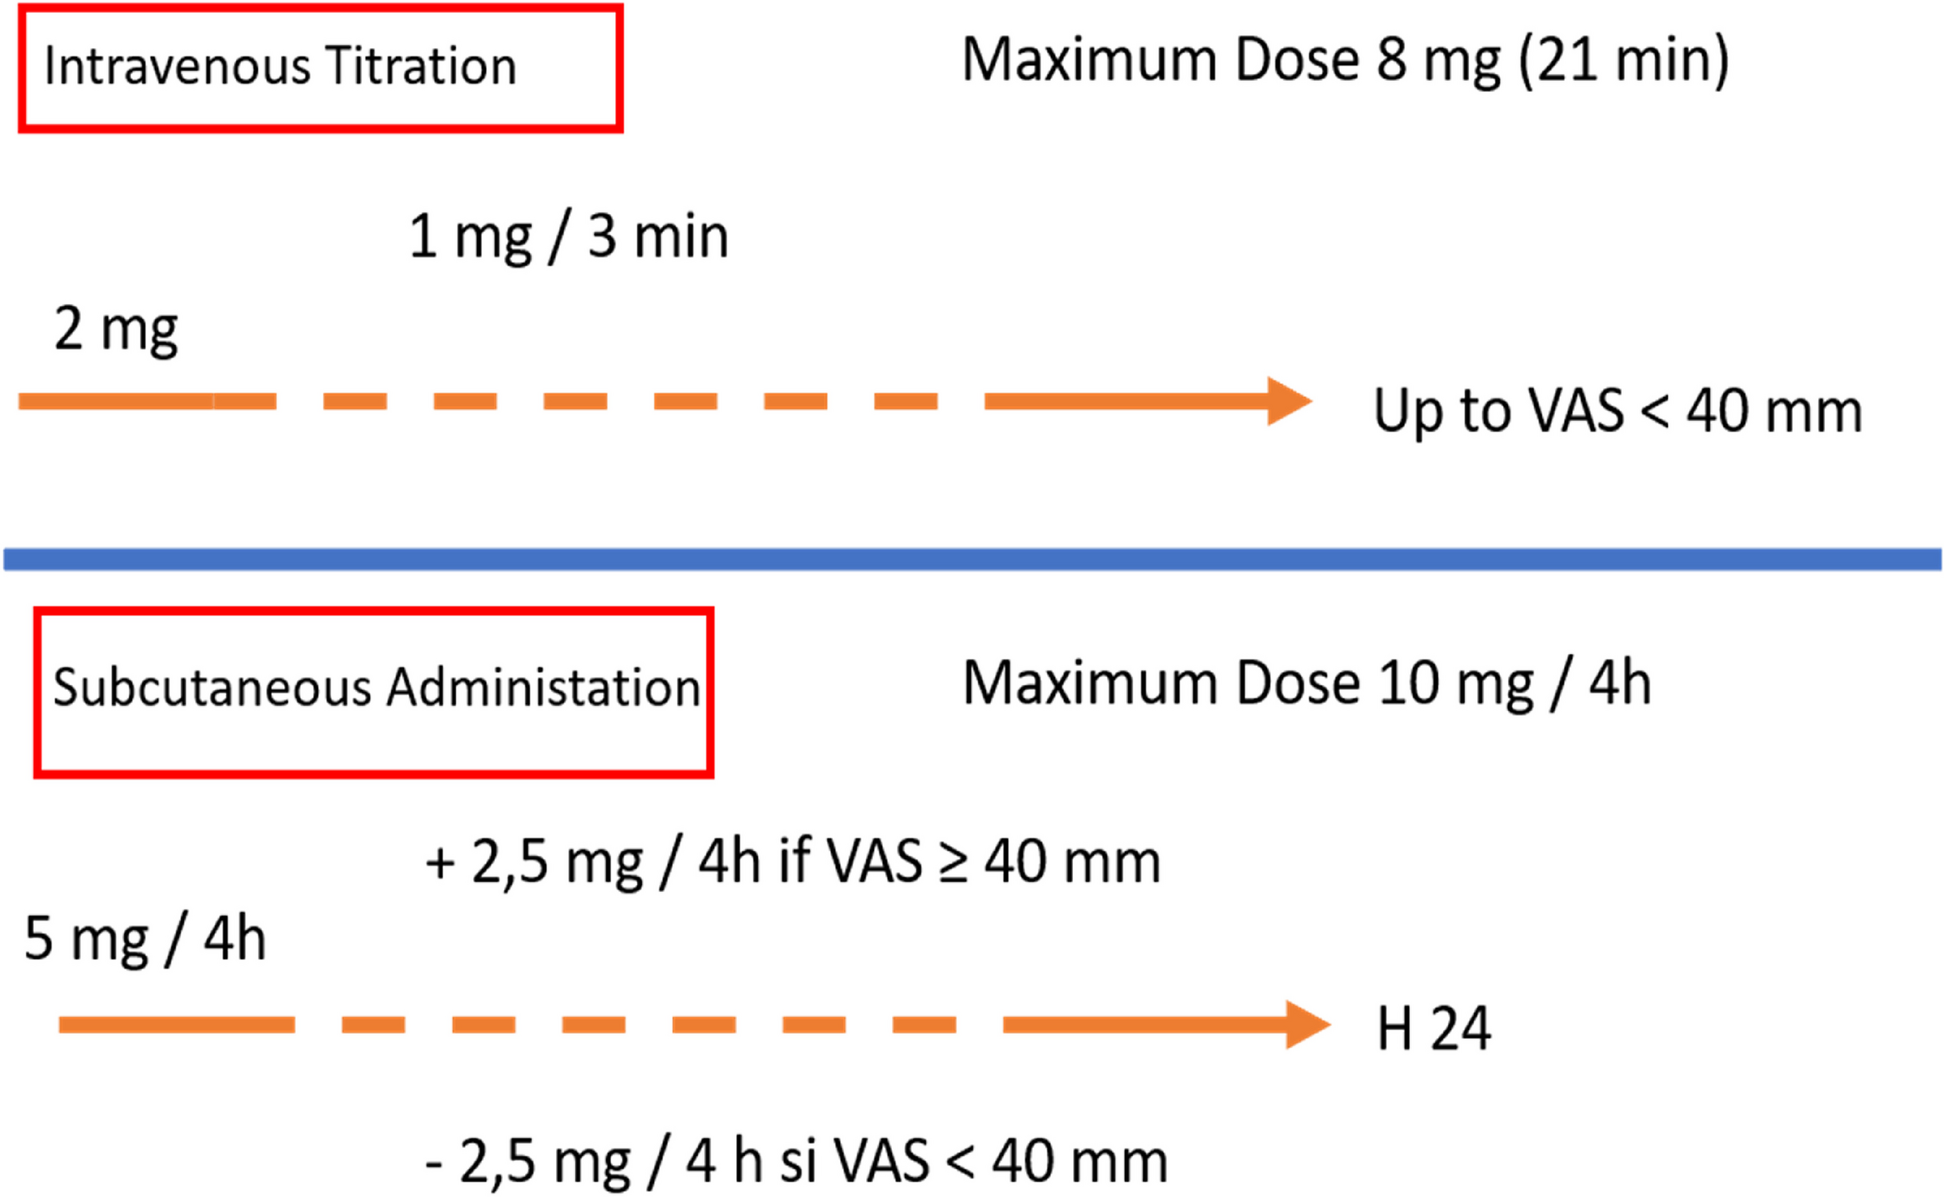 Low dose of morphine to relieve dyspnea in acute respiratory failure: the OpiDys double-blind randomized controlled trial